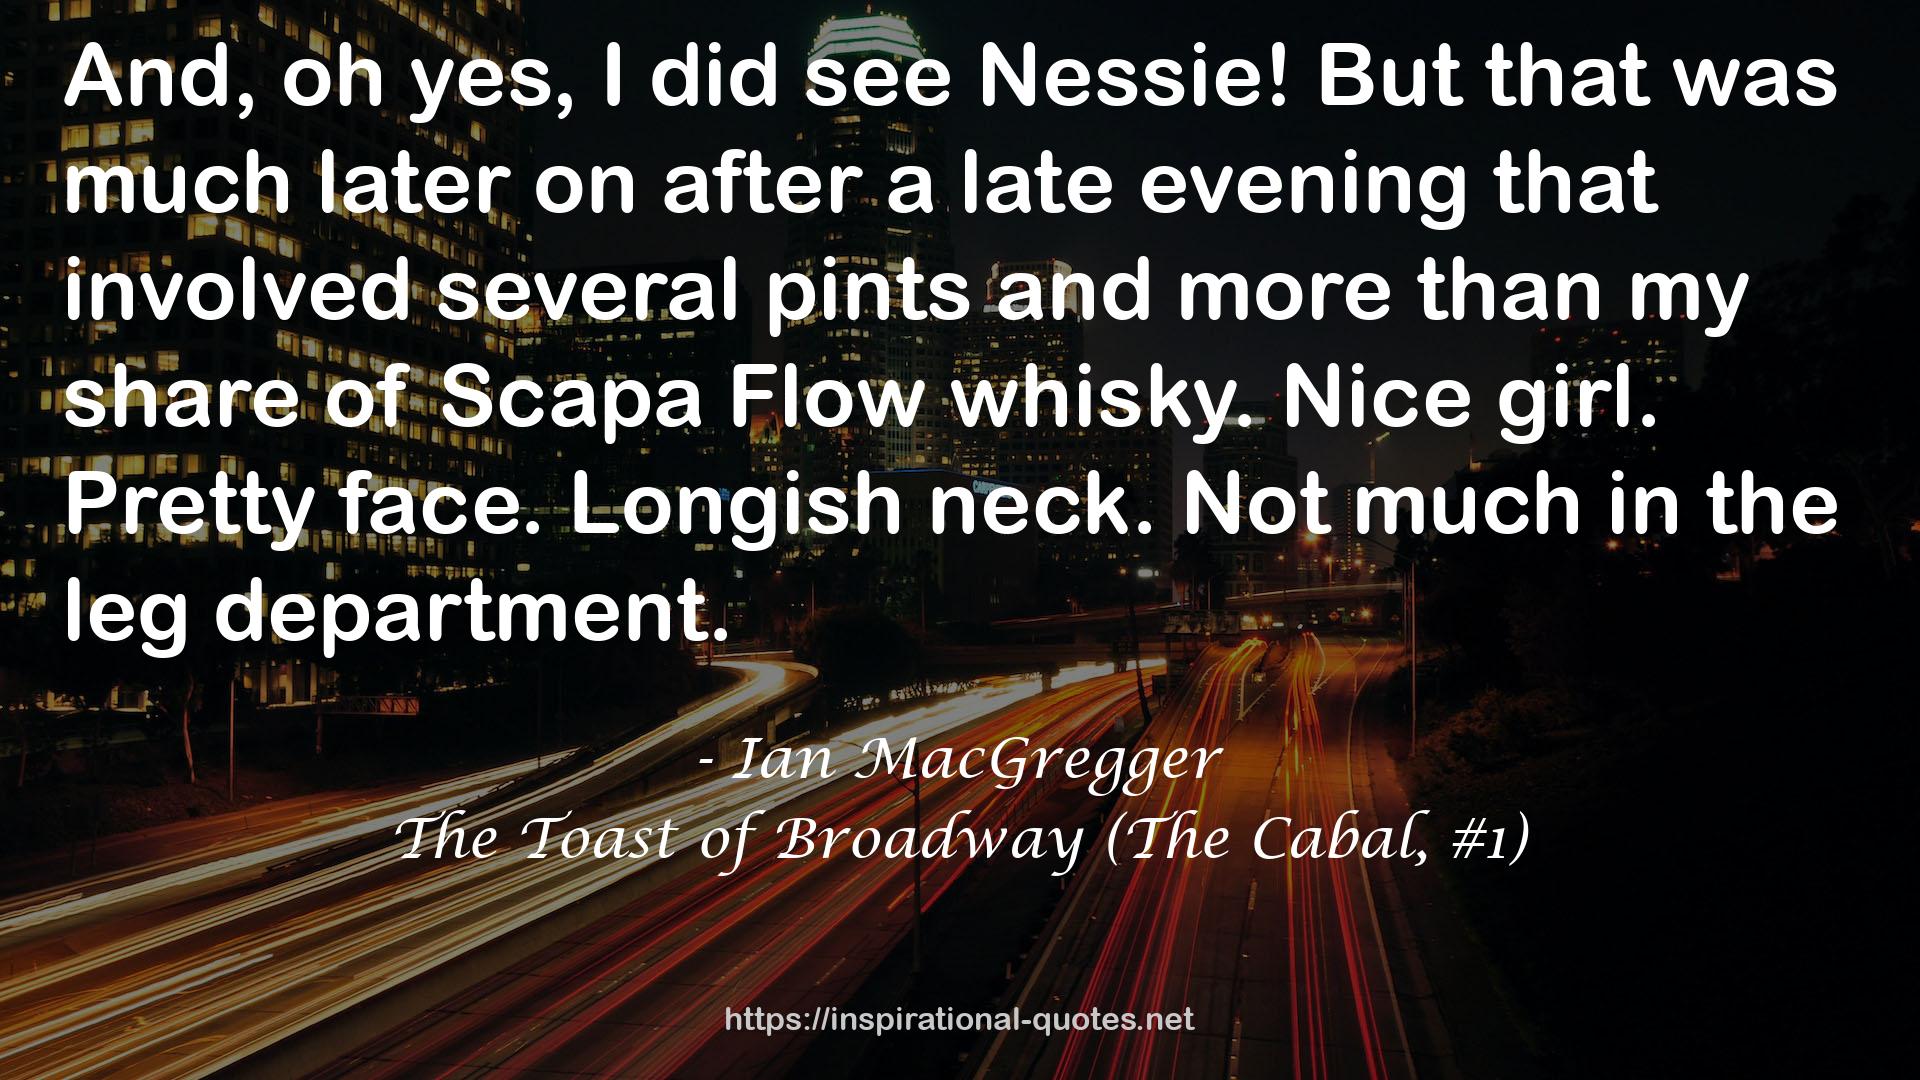 The Toast of Broadway (The Cabal, #1) QUOTES